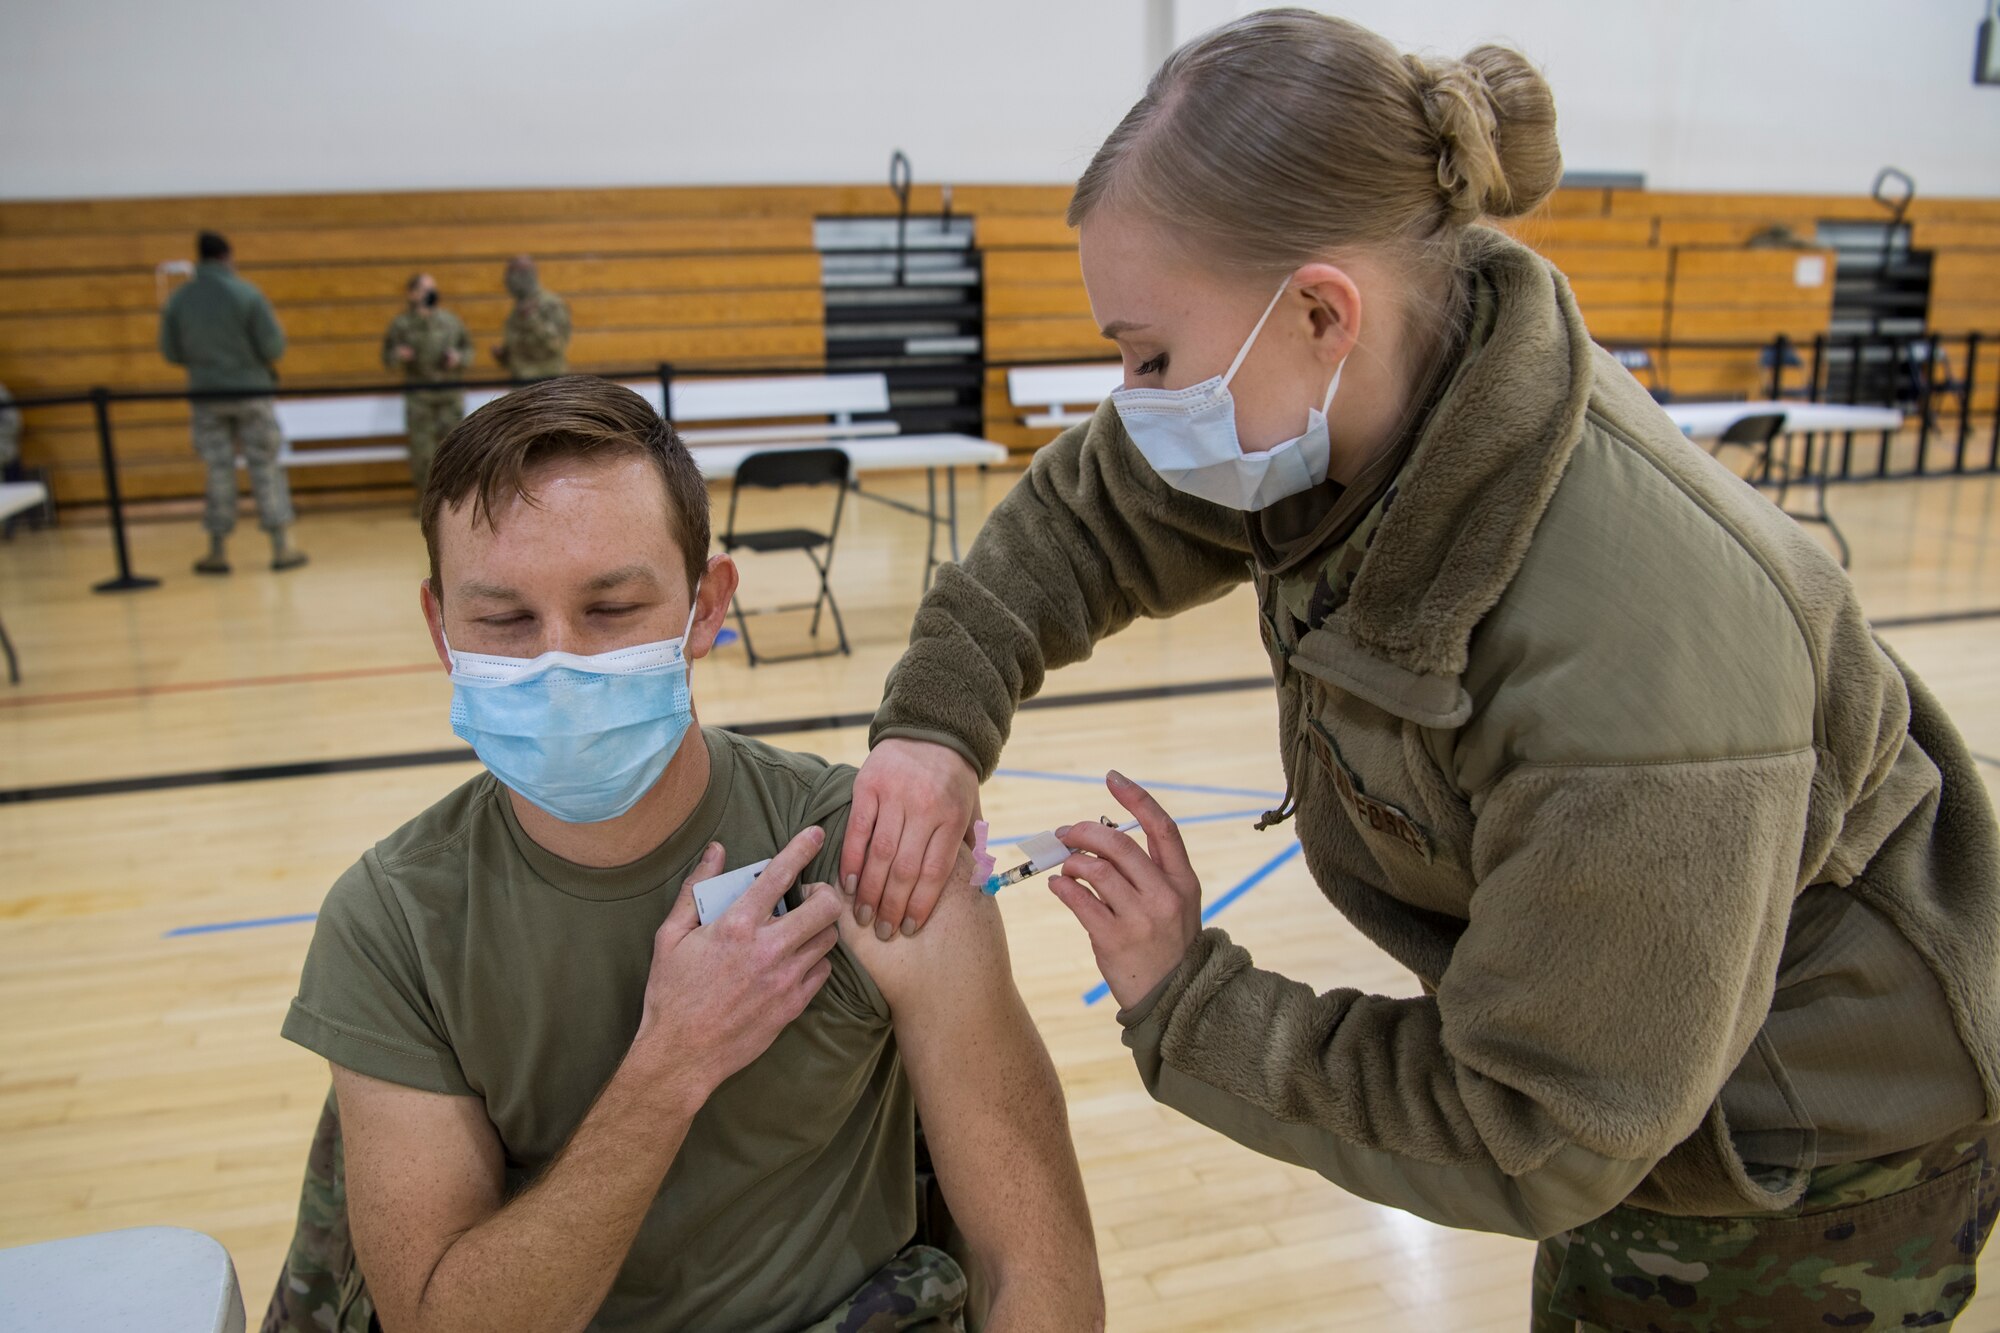 The 514 AMW began distributing the vaccines to facilitate a return to normal operations, improve medical readiness, and protect its members and their families.